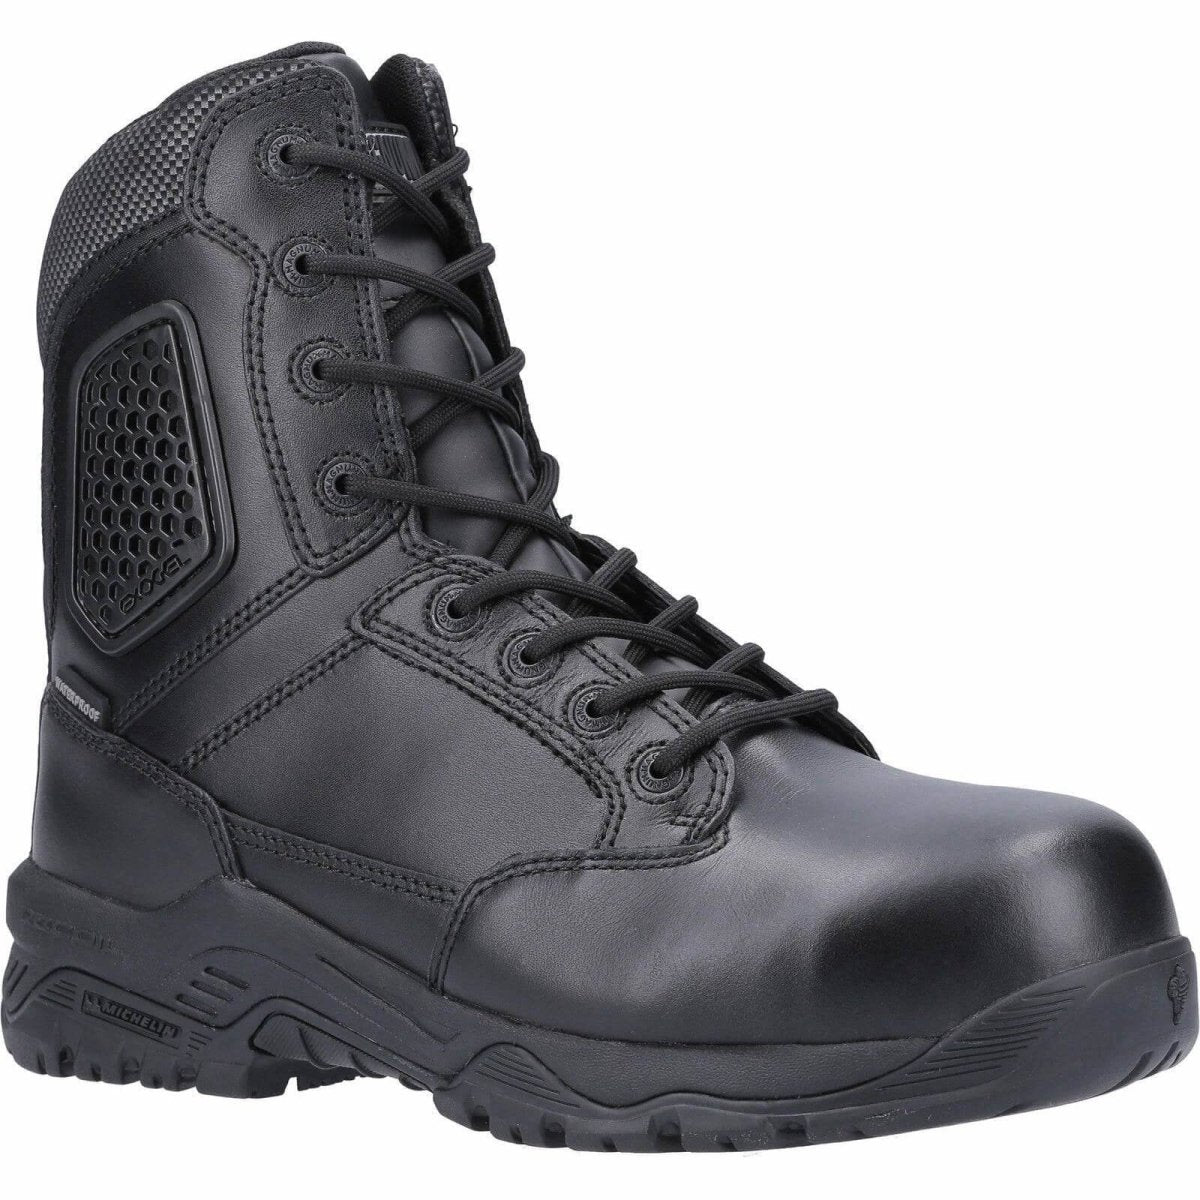 Magnum Strike Force 8.0 Safety Boots - Shoe Store Direct